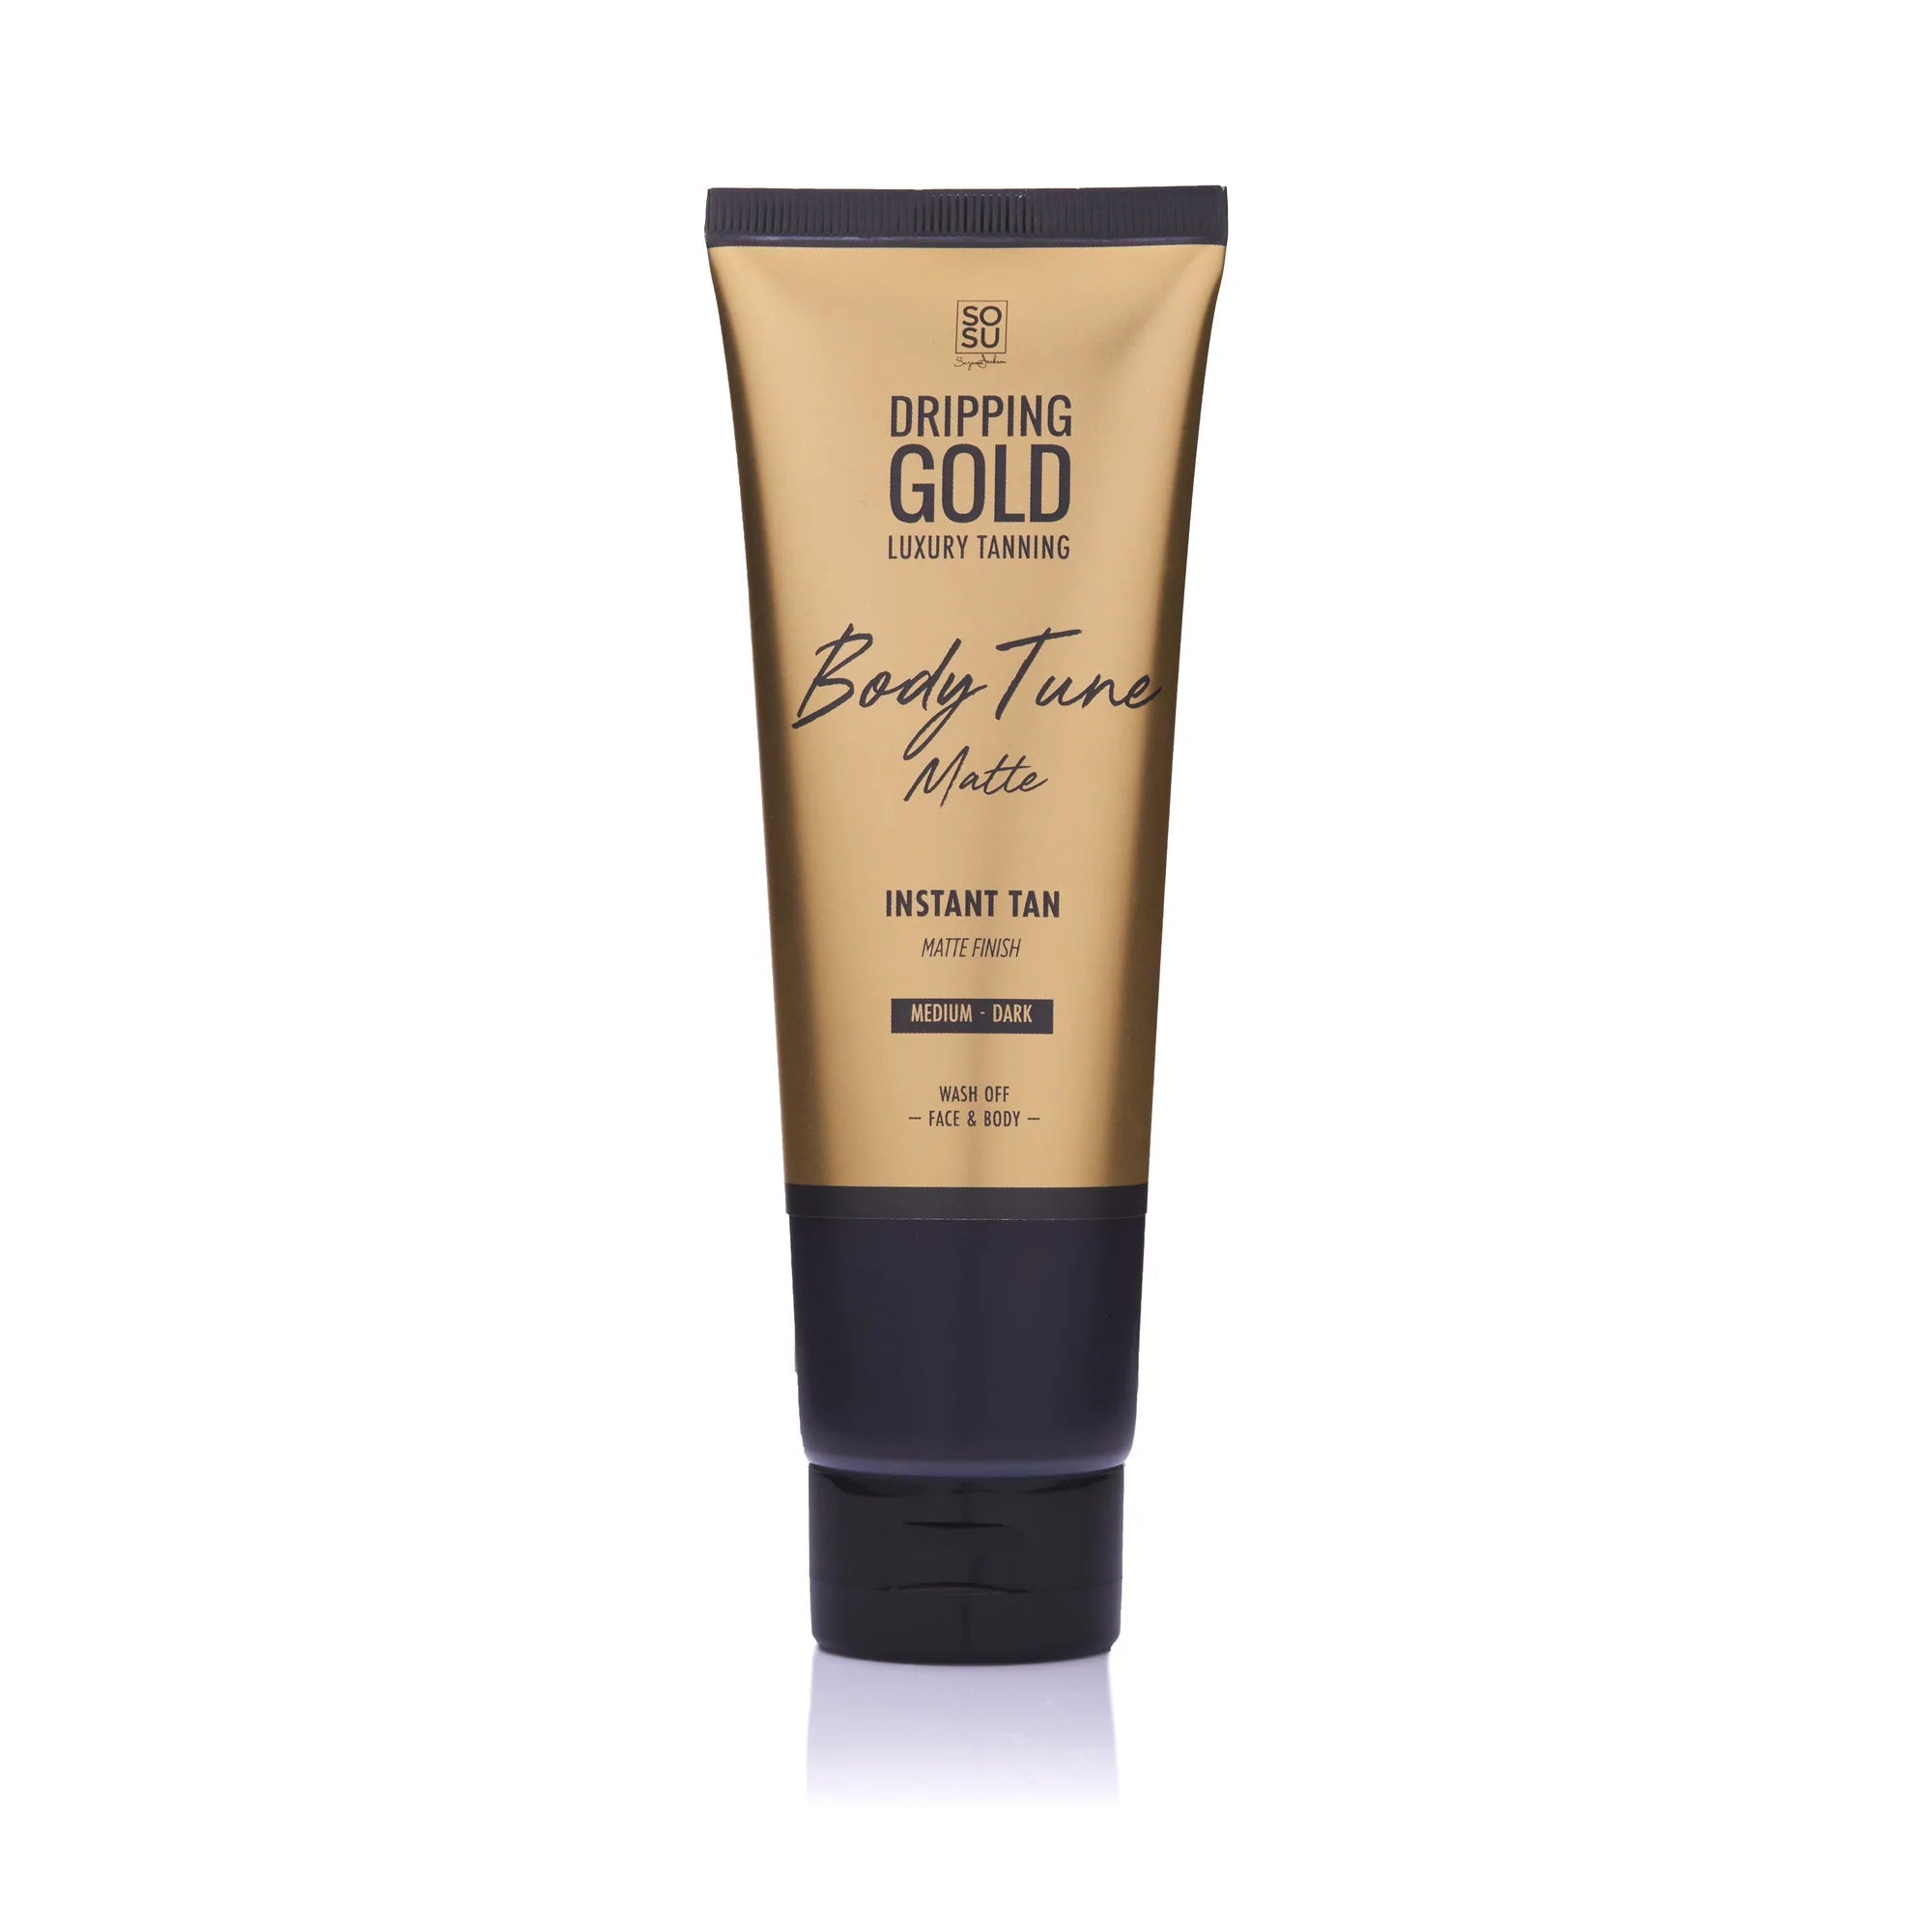 DRIPPING GOLD BODY TUNE INSTANT TAN MATTE